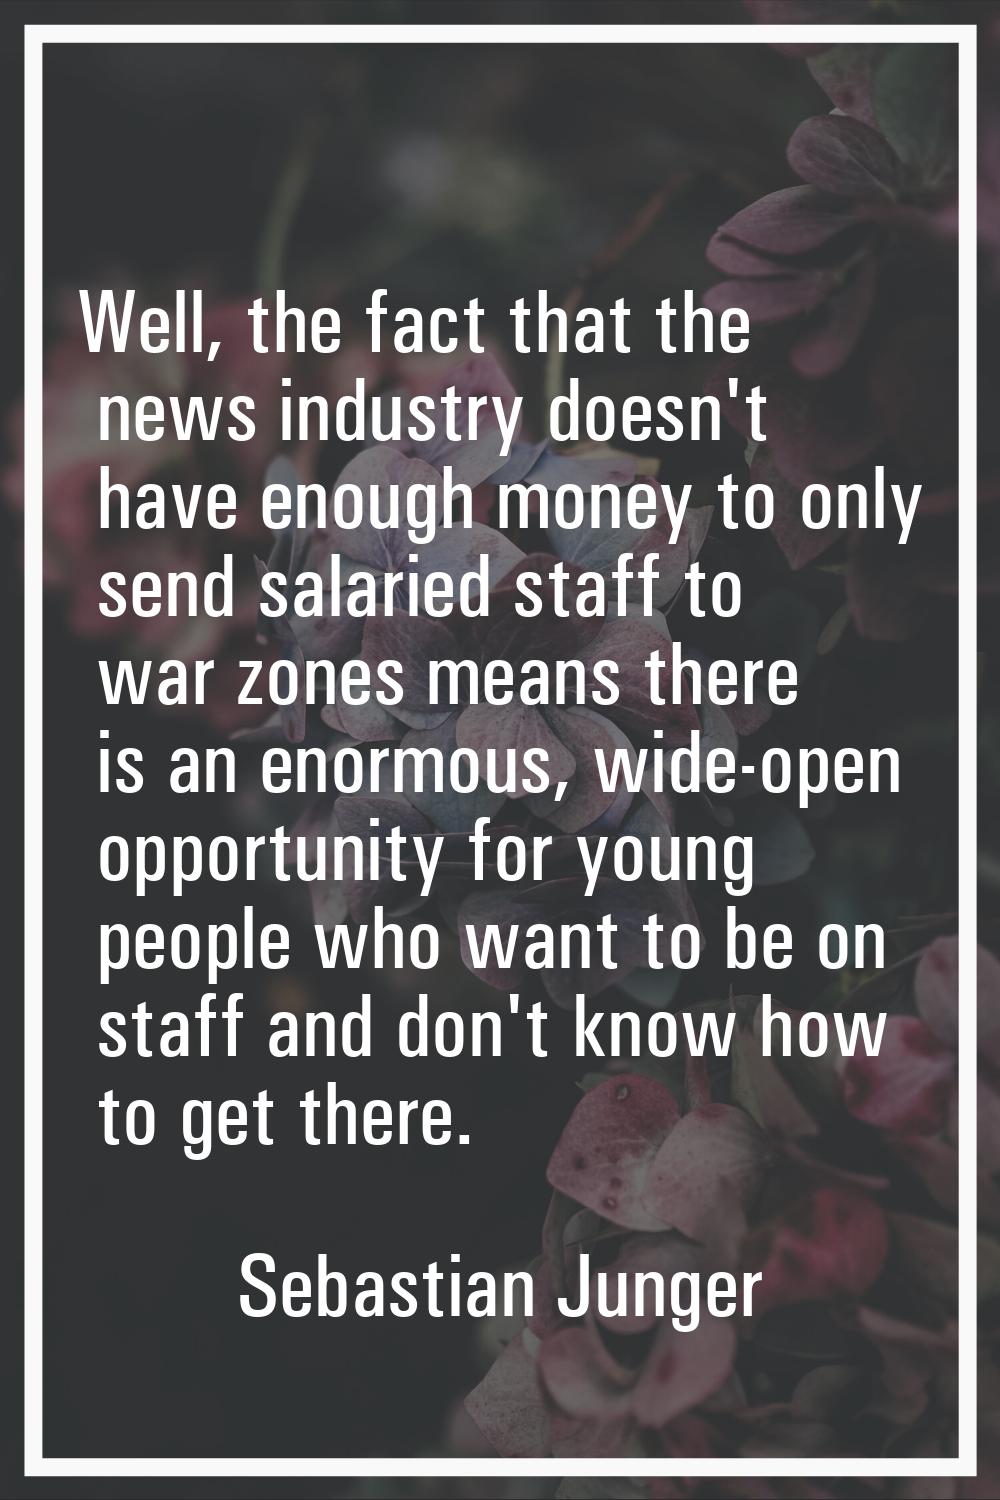 Well, the fact that the news industry doesn't have enough money to only send salaried staff to war 